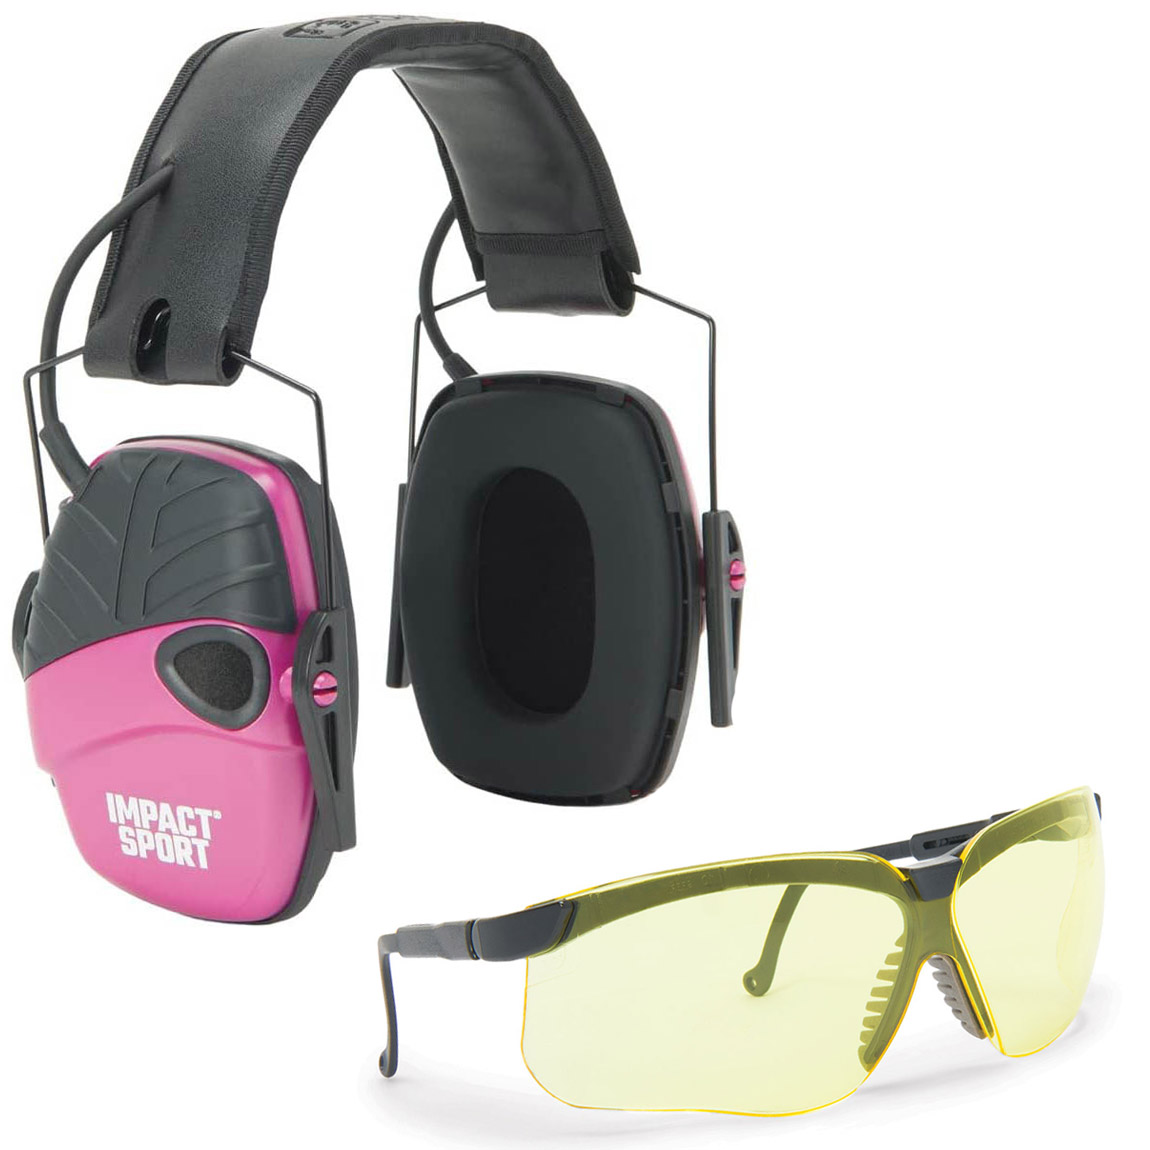 Howard Leight Shooting Range Earmuffs and Safety Glasses for Smaller Head Sizes